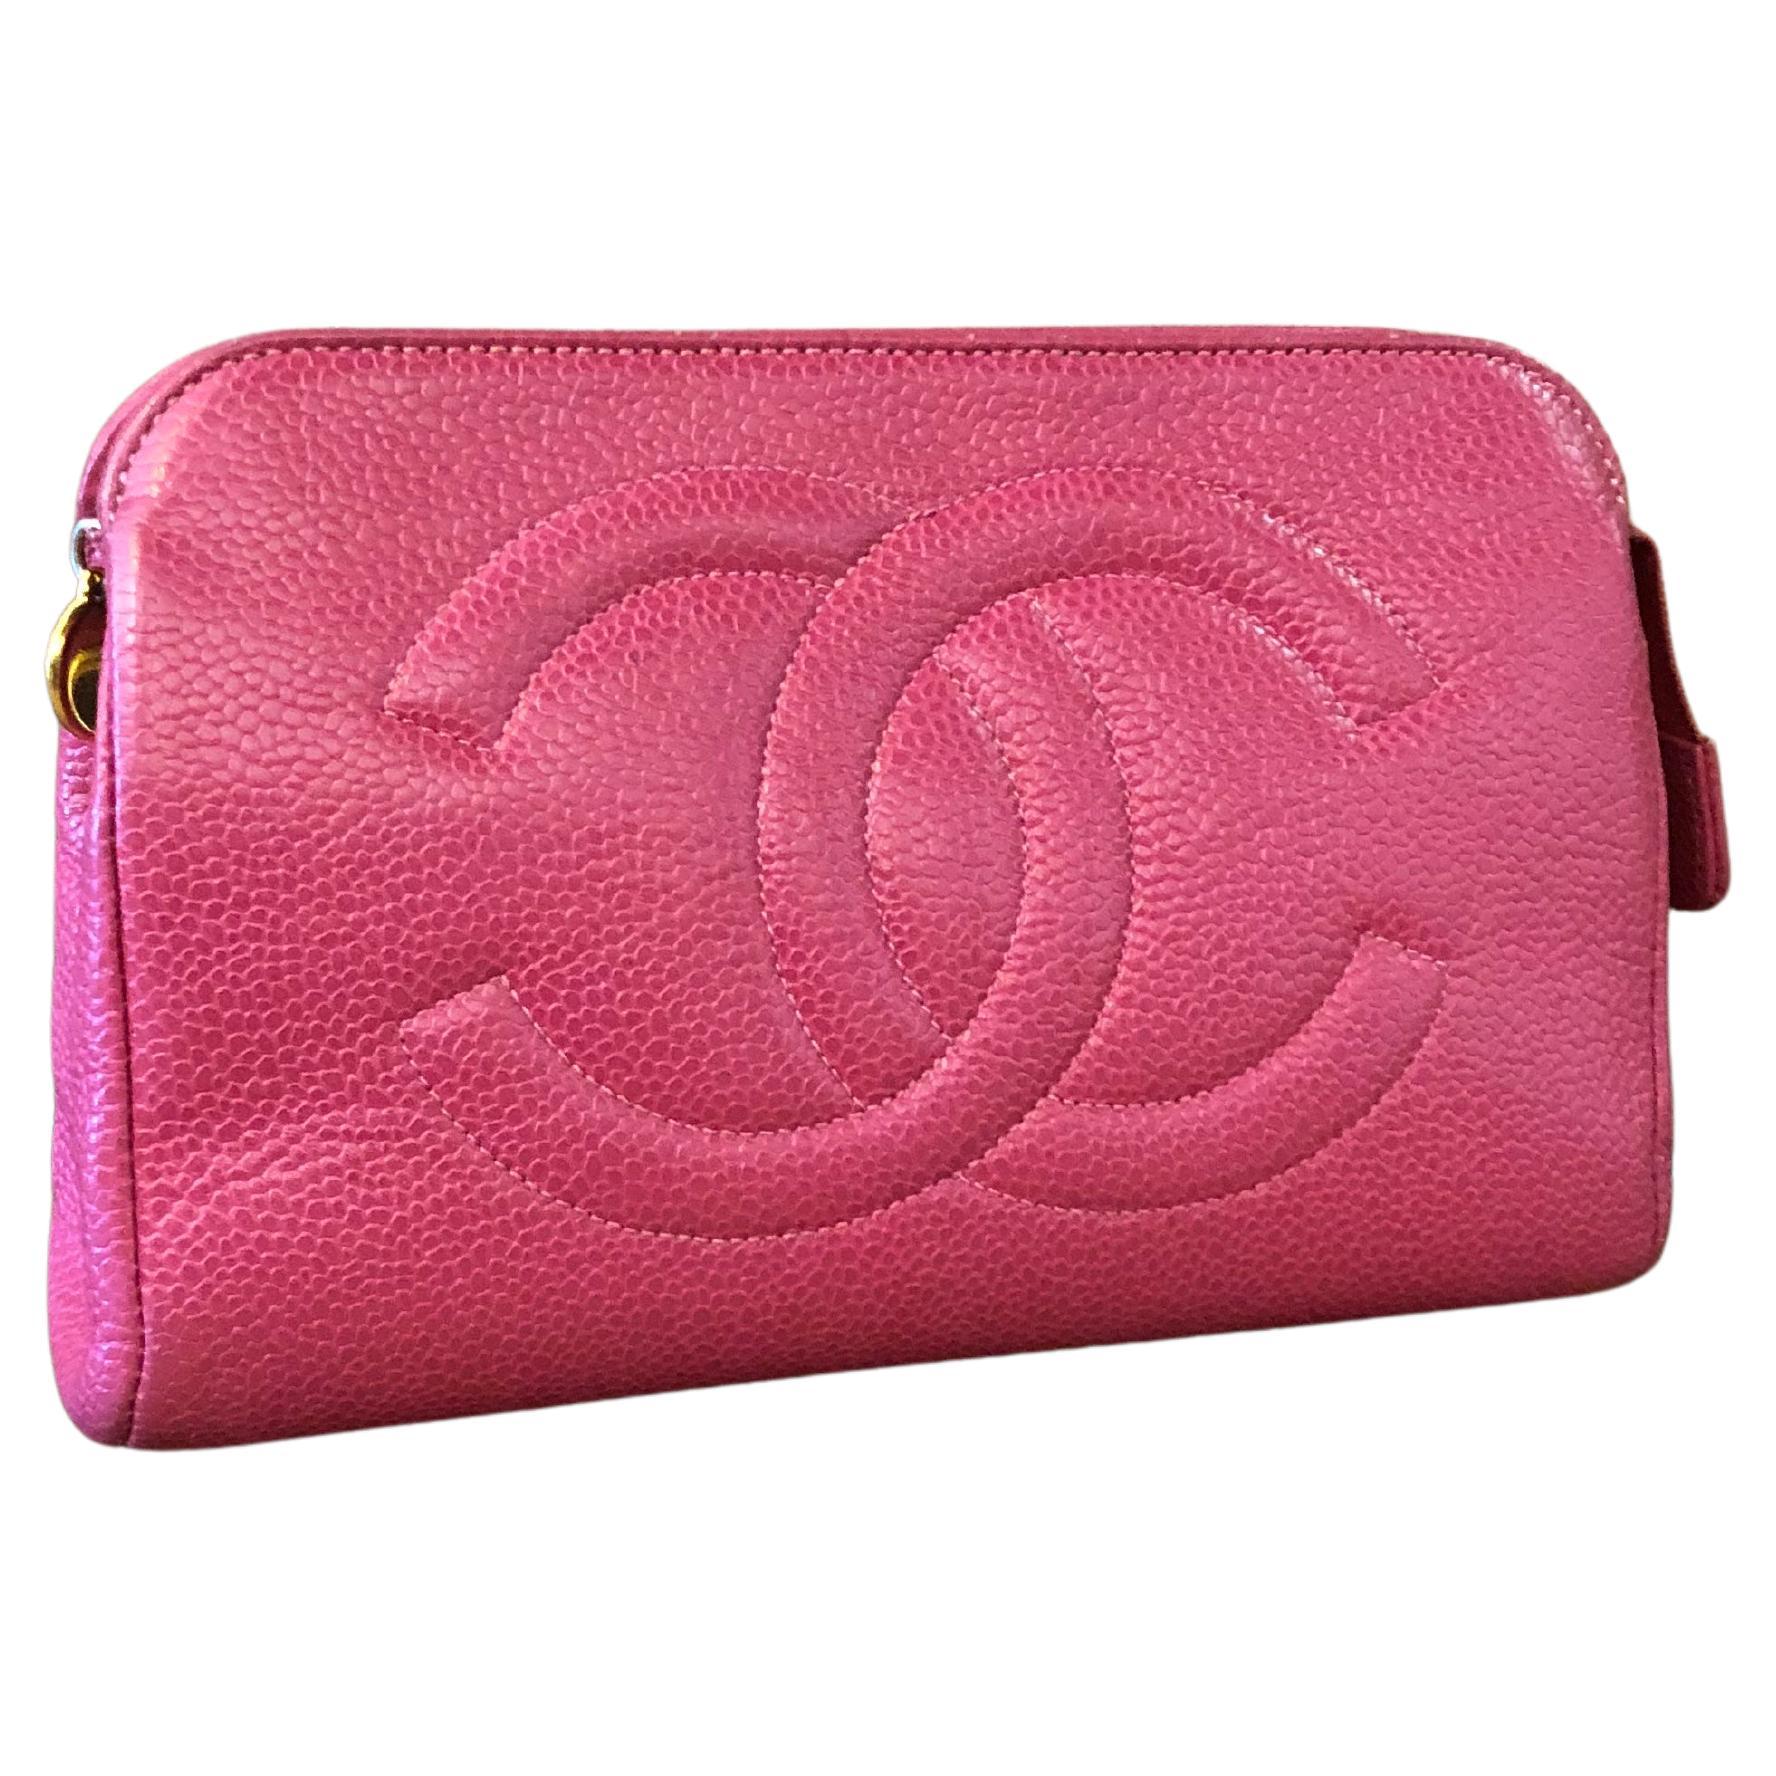 Vintage CHANEL Pink Caviar Leather Pouch Bag Clutch Bag (Altered)